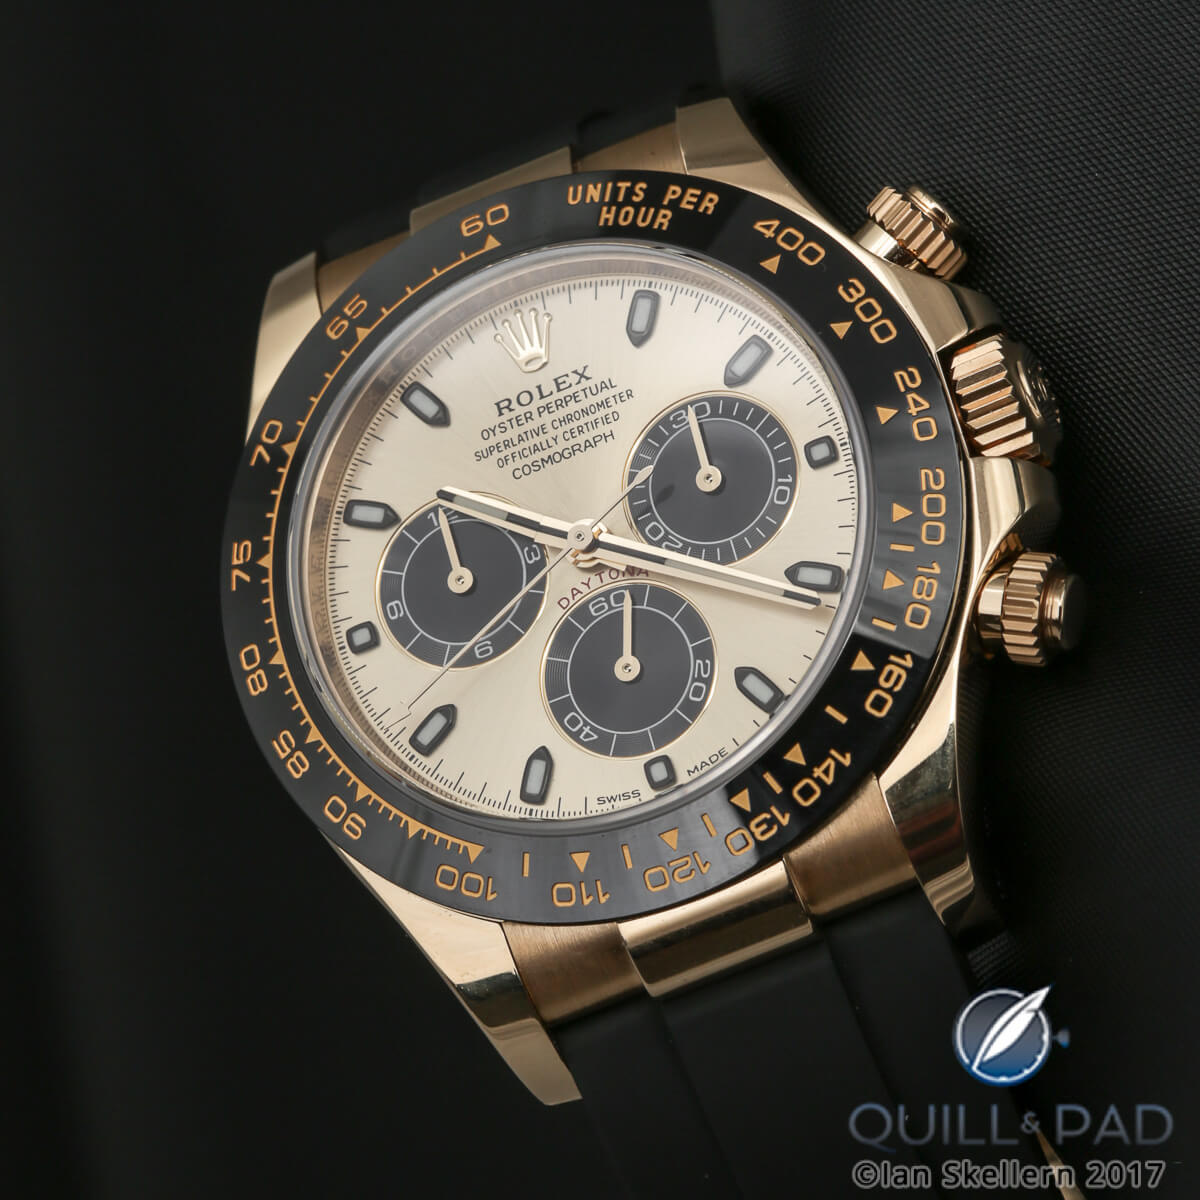 Rolex Oyster Perpetual Cosmograph chronograph